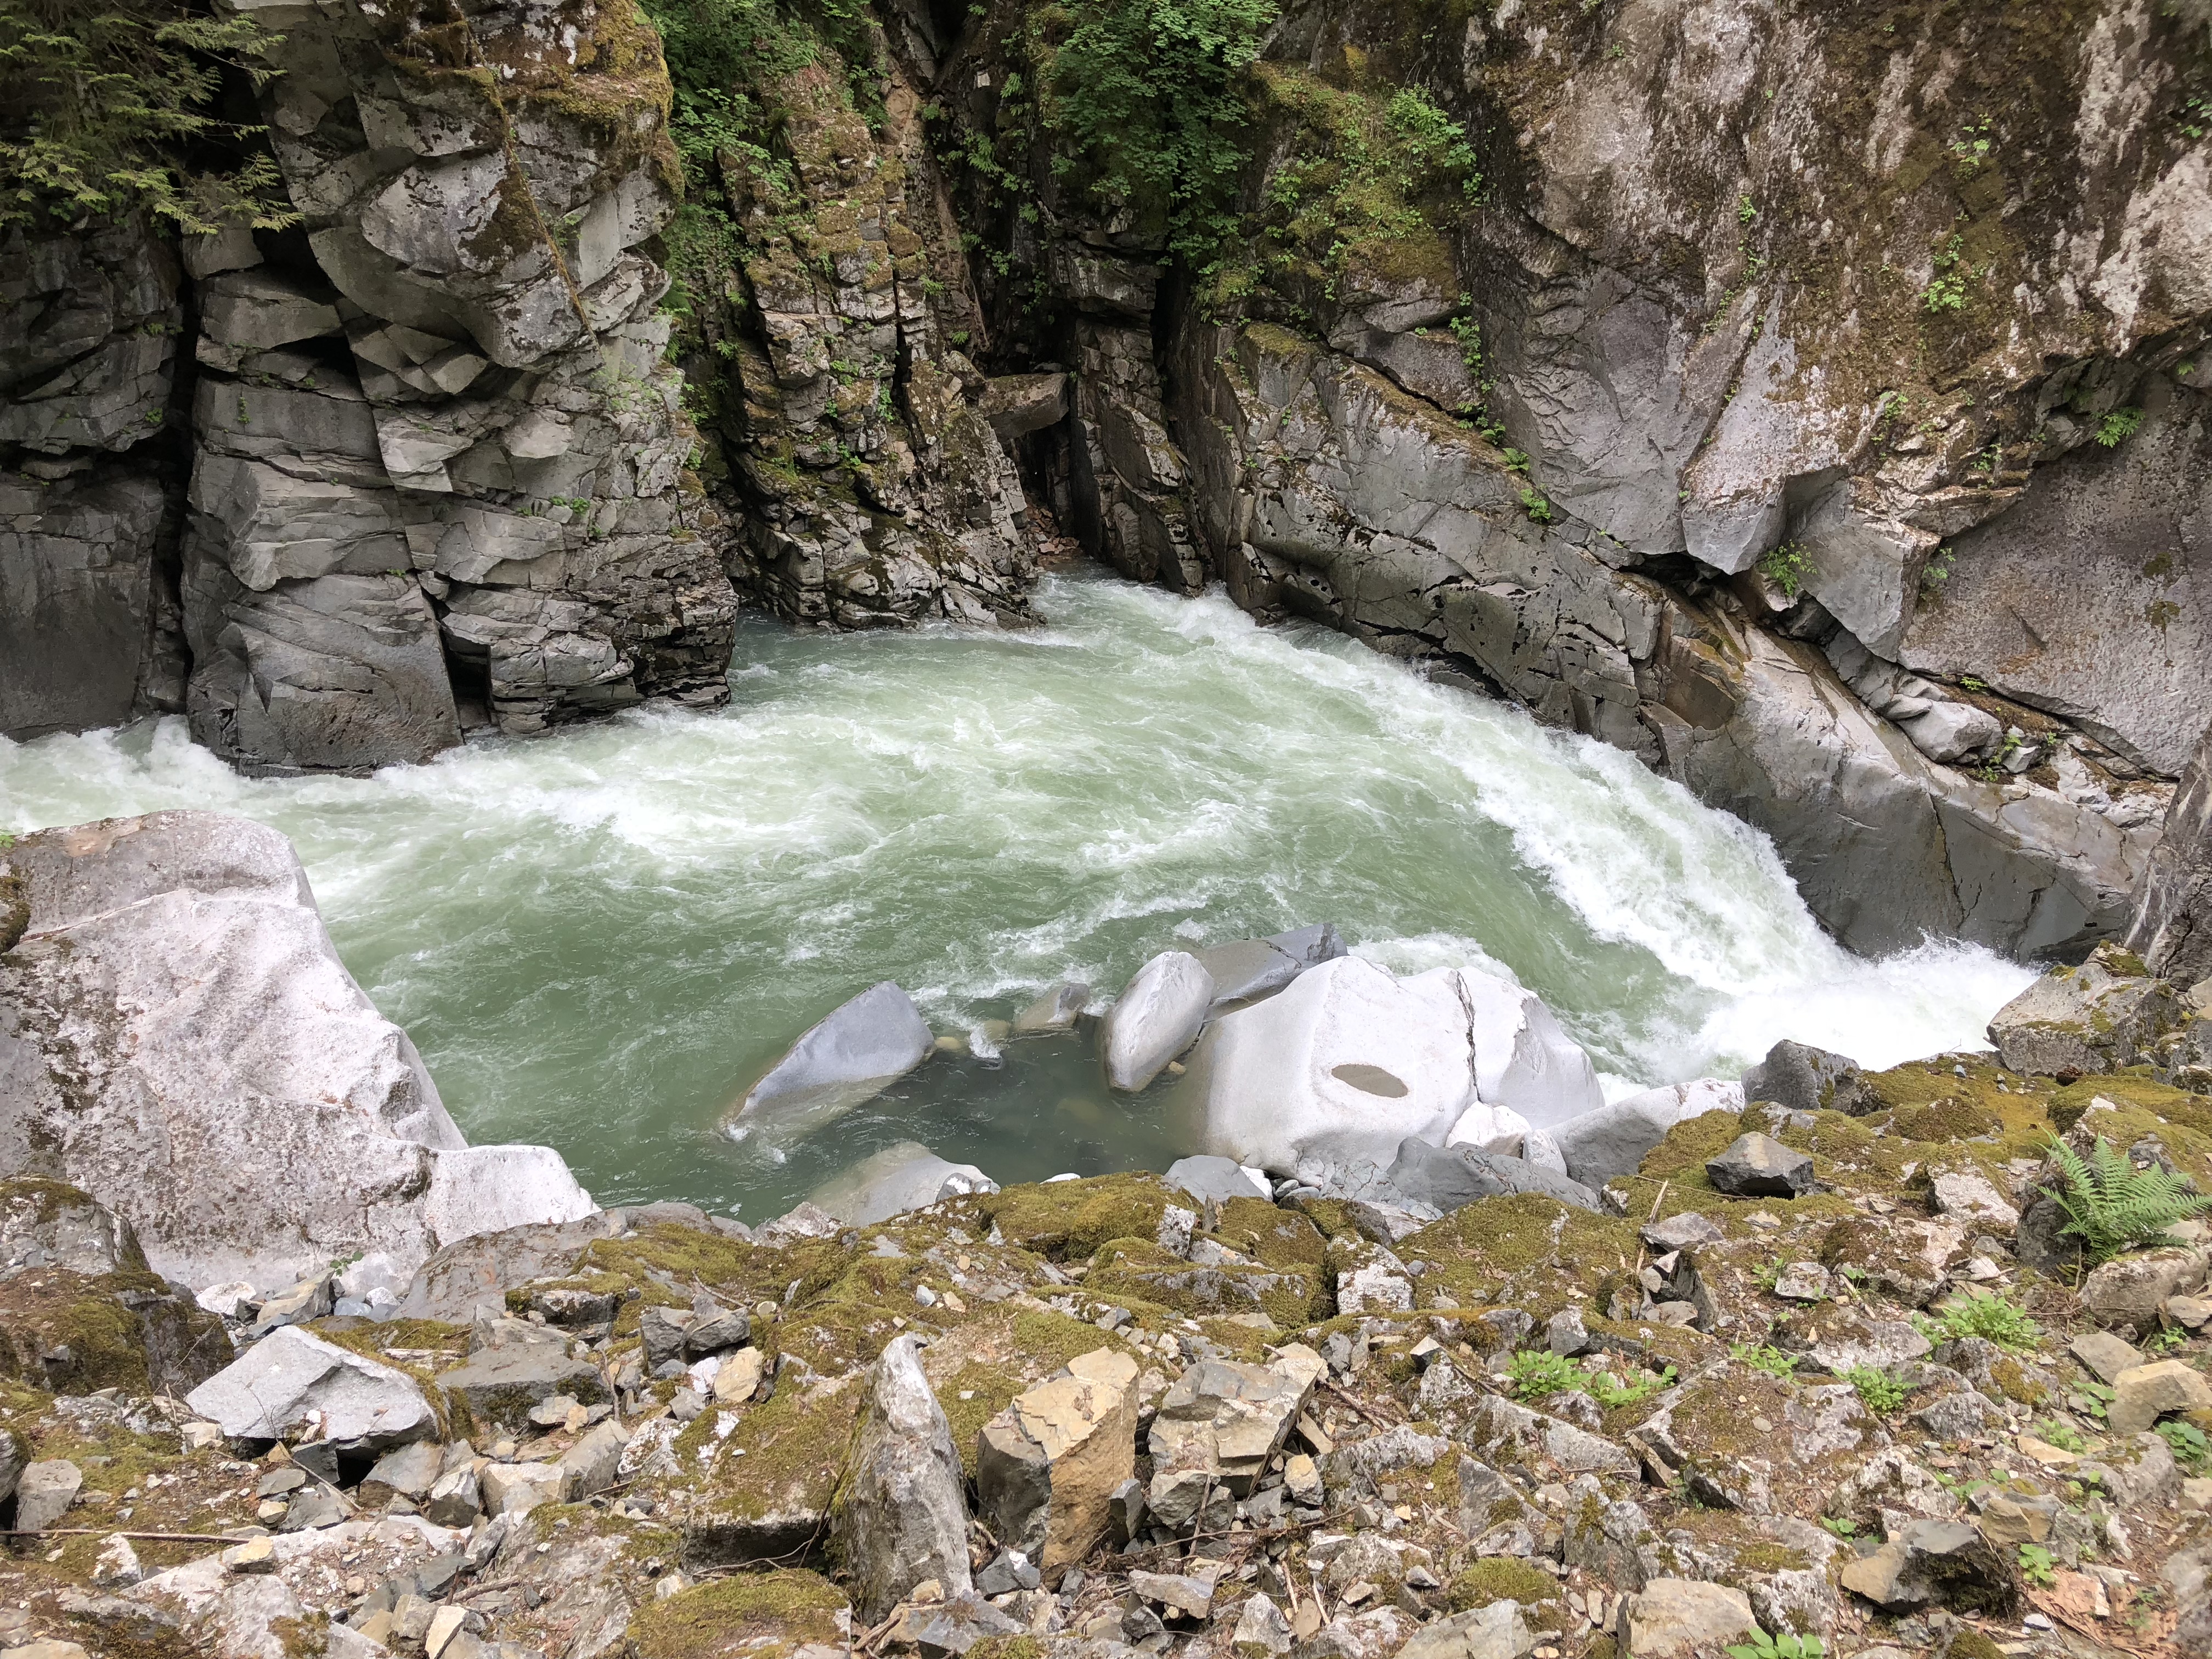 othello tunnels Hike, hope BC - family friendly hikes in BC - family friendly hikes in hope - Family friendly hikes in Vancouver - hiking adventures - kid friendly hikes in vancouver - easy summer hikes - easy hikes in vancouver